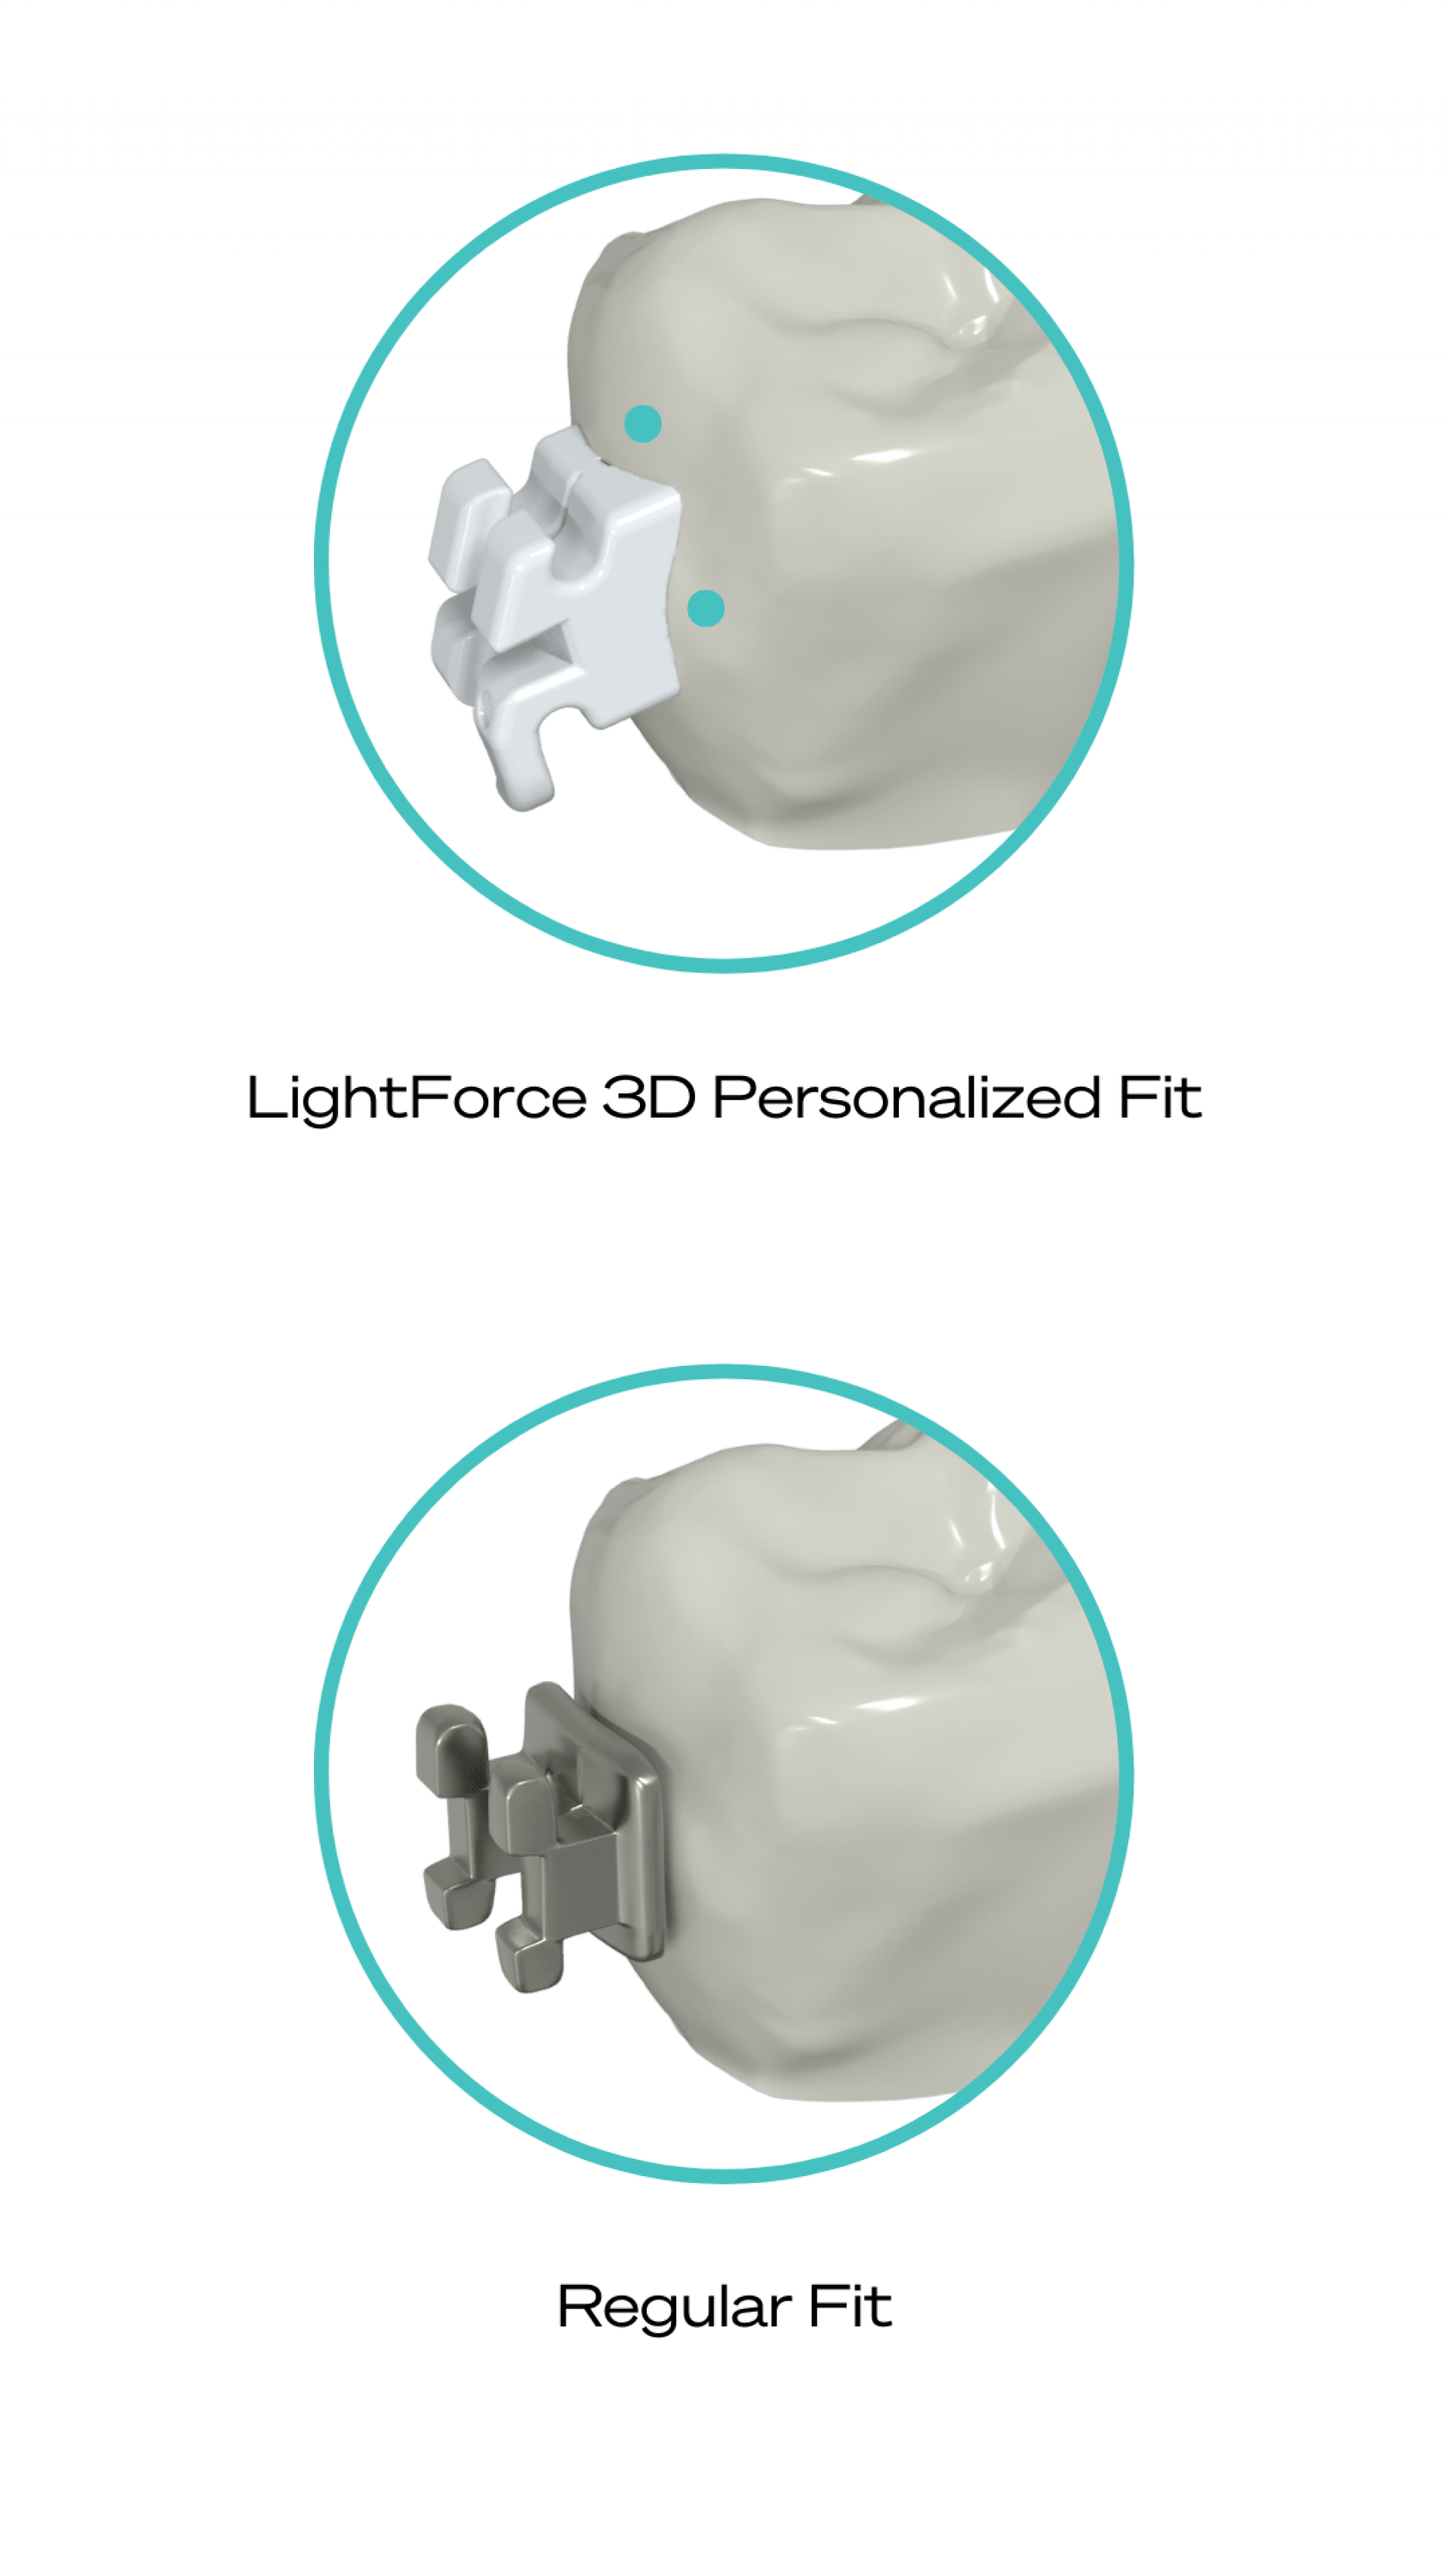 LightForce 3D Personalized and Right Fit